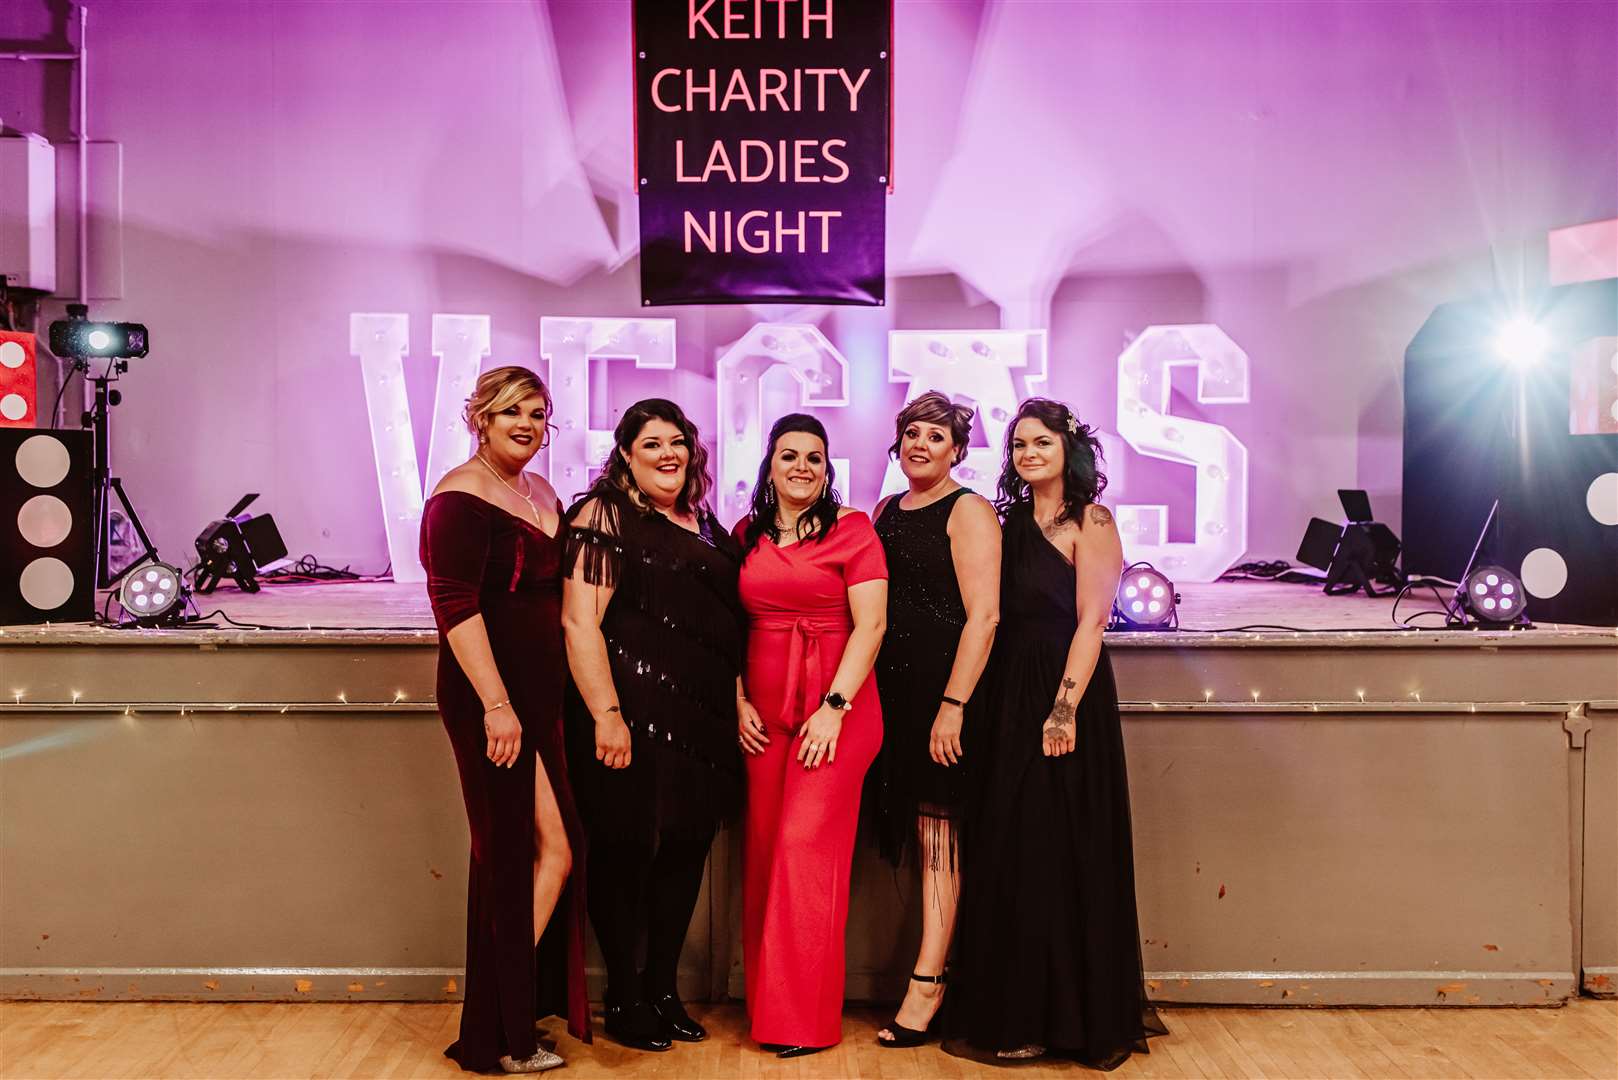 Glammed up for the Las Vegas spectacular are organisers (from left) Joeanne McDonagh, Kerry Forrest, Diane Barbour, Karren Forsyth and Debbie Smith. Picture: Linzi Lou Photography.